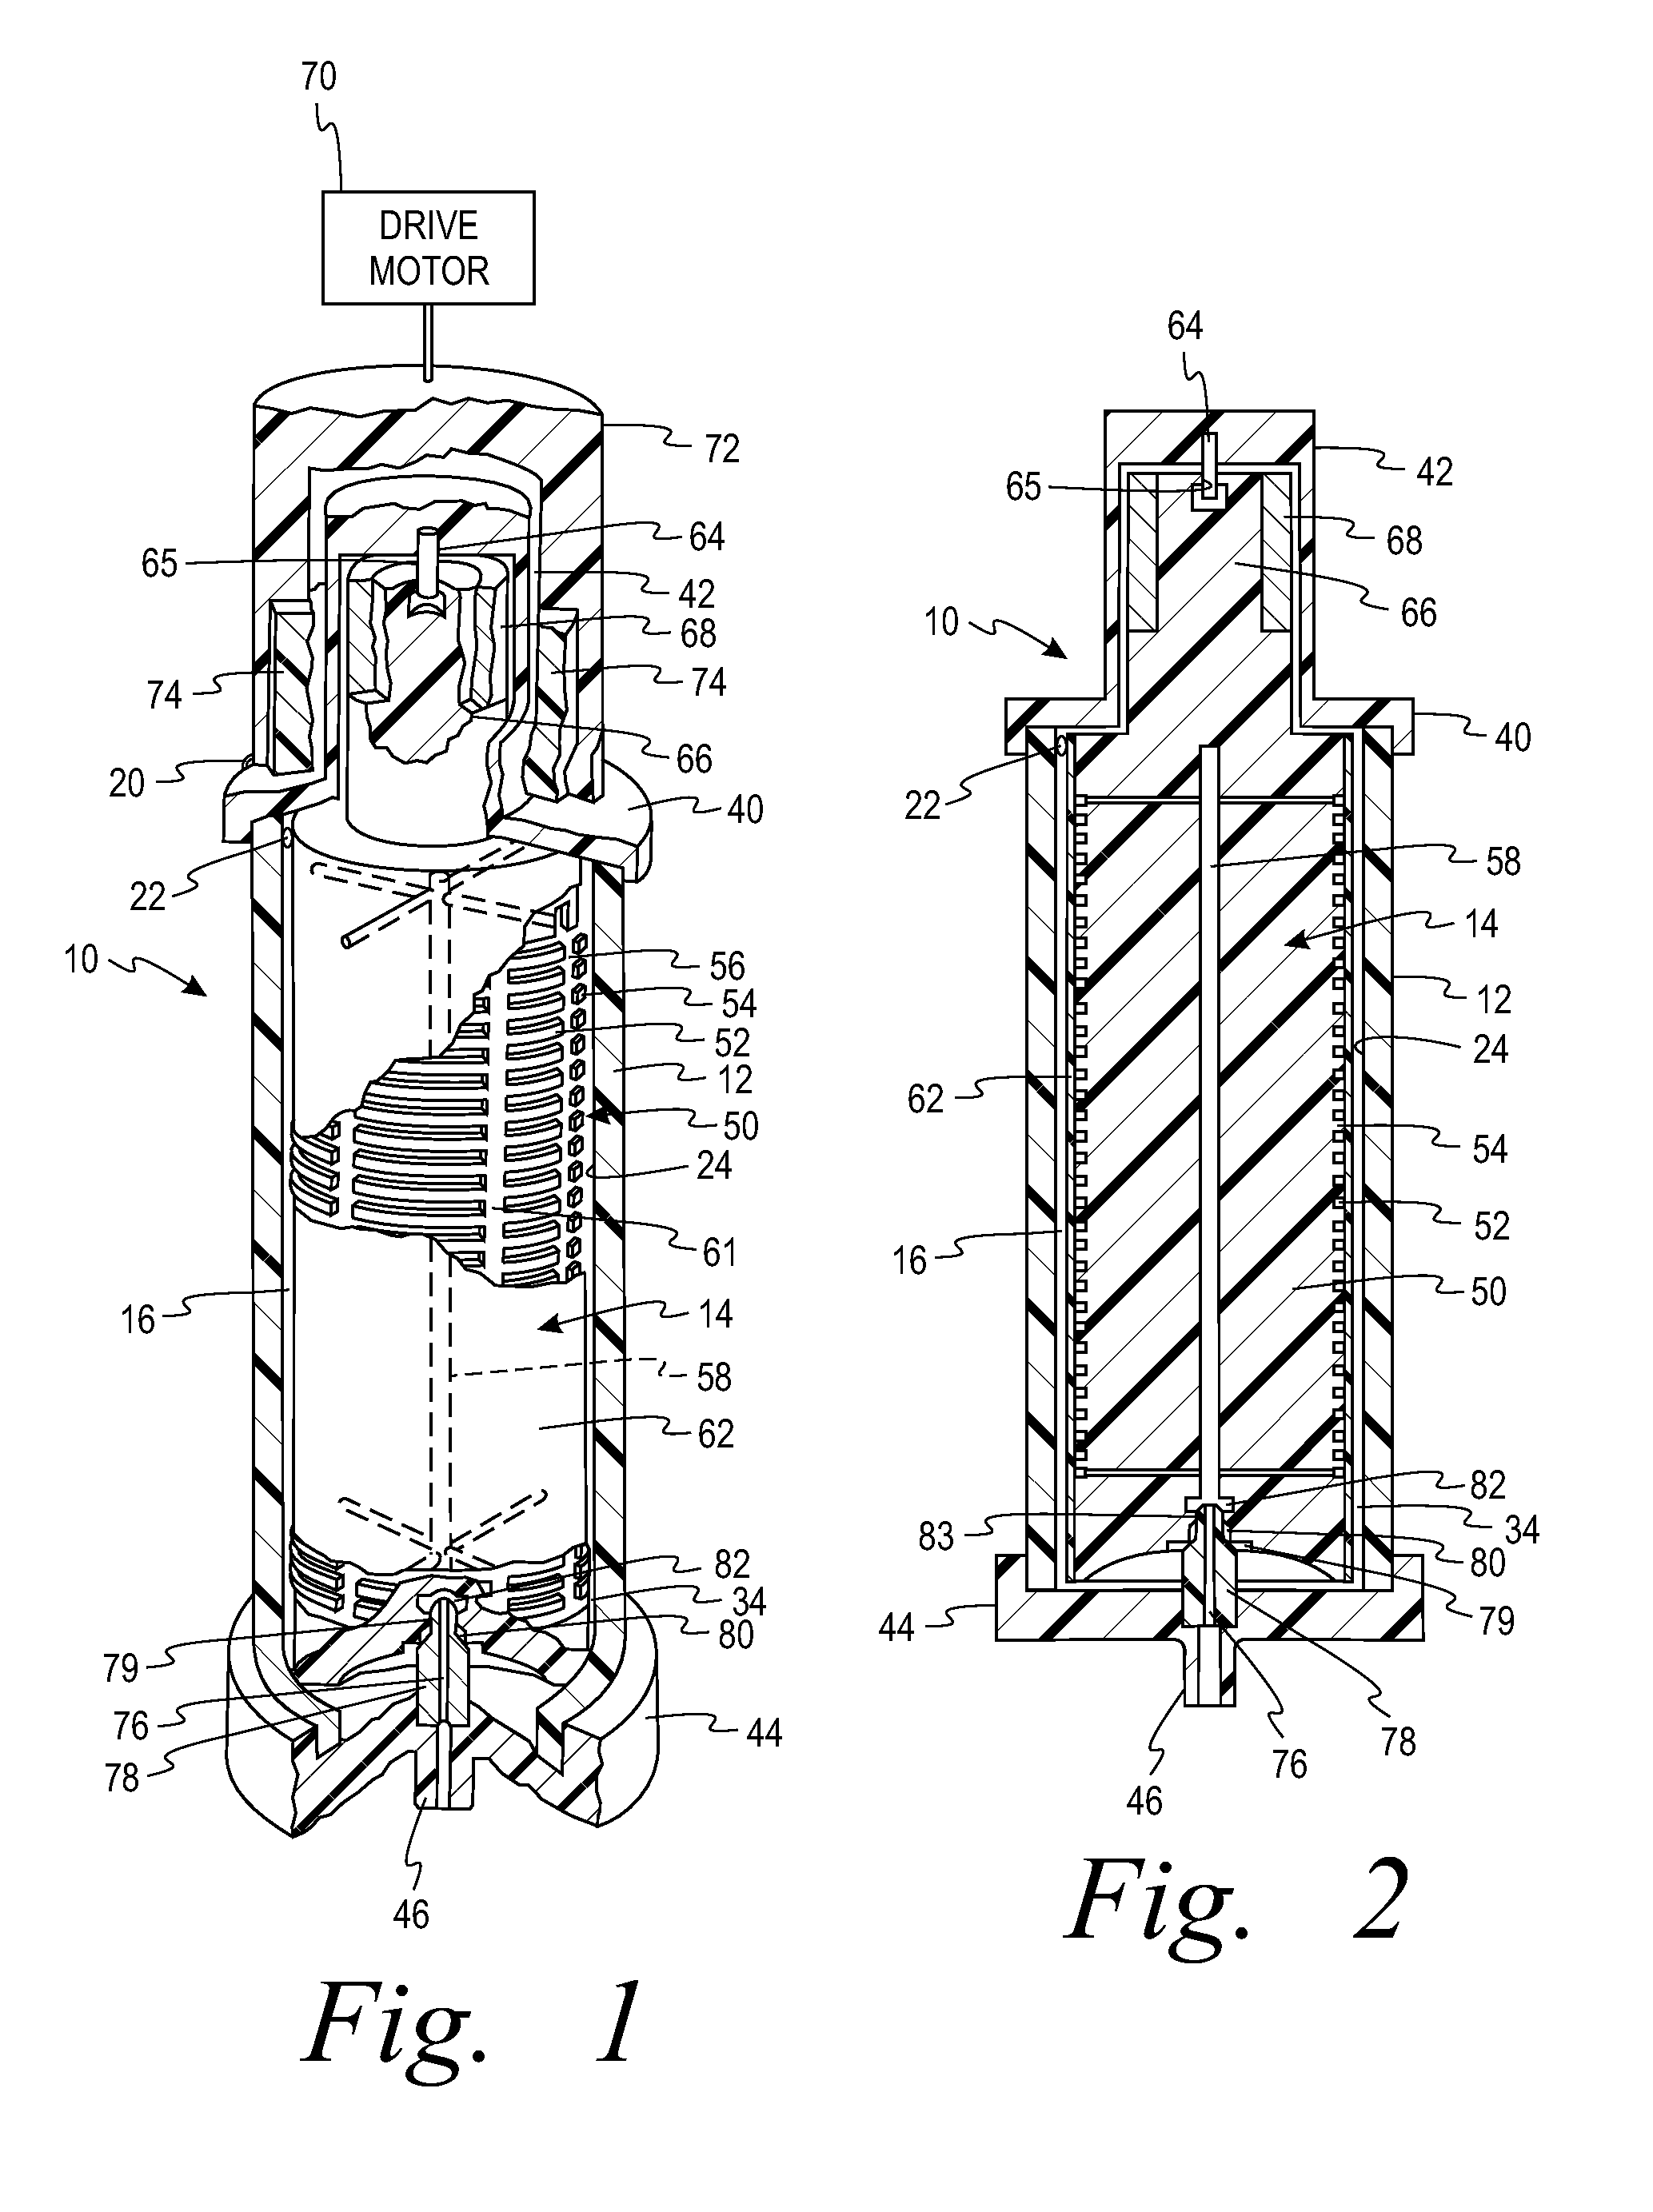 Membrane separation devices, systems and methods employing same, and data management systems and methods